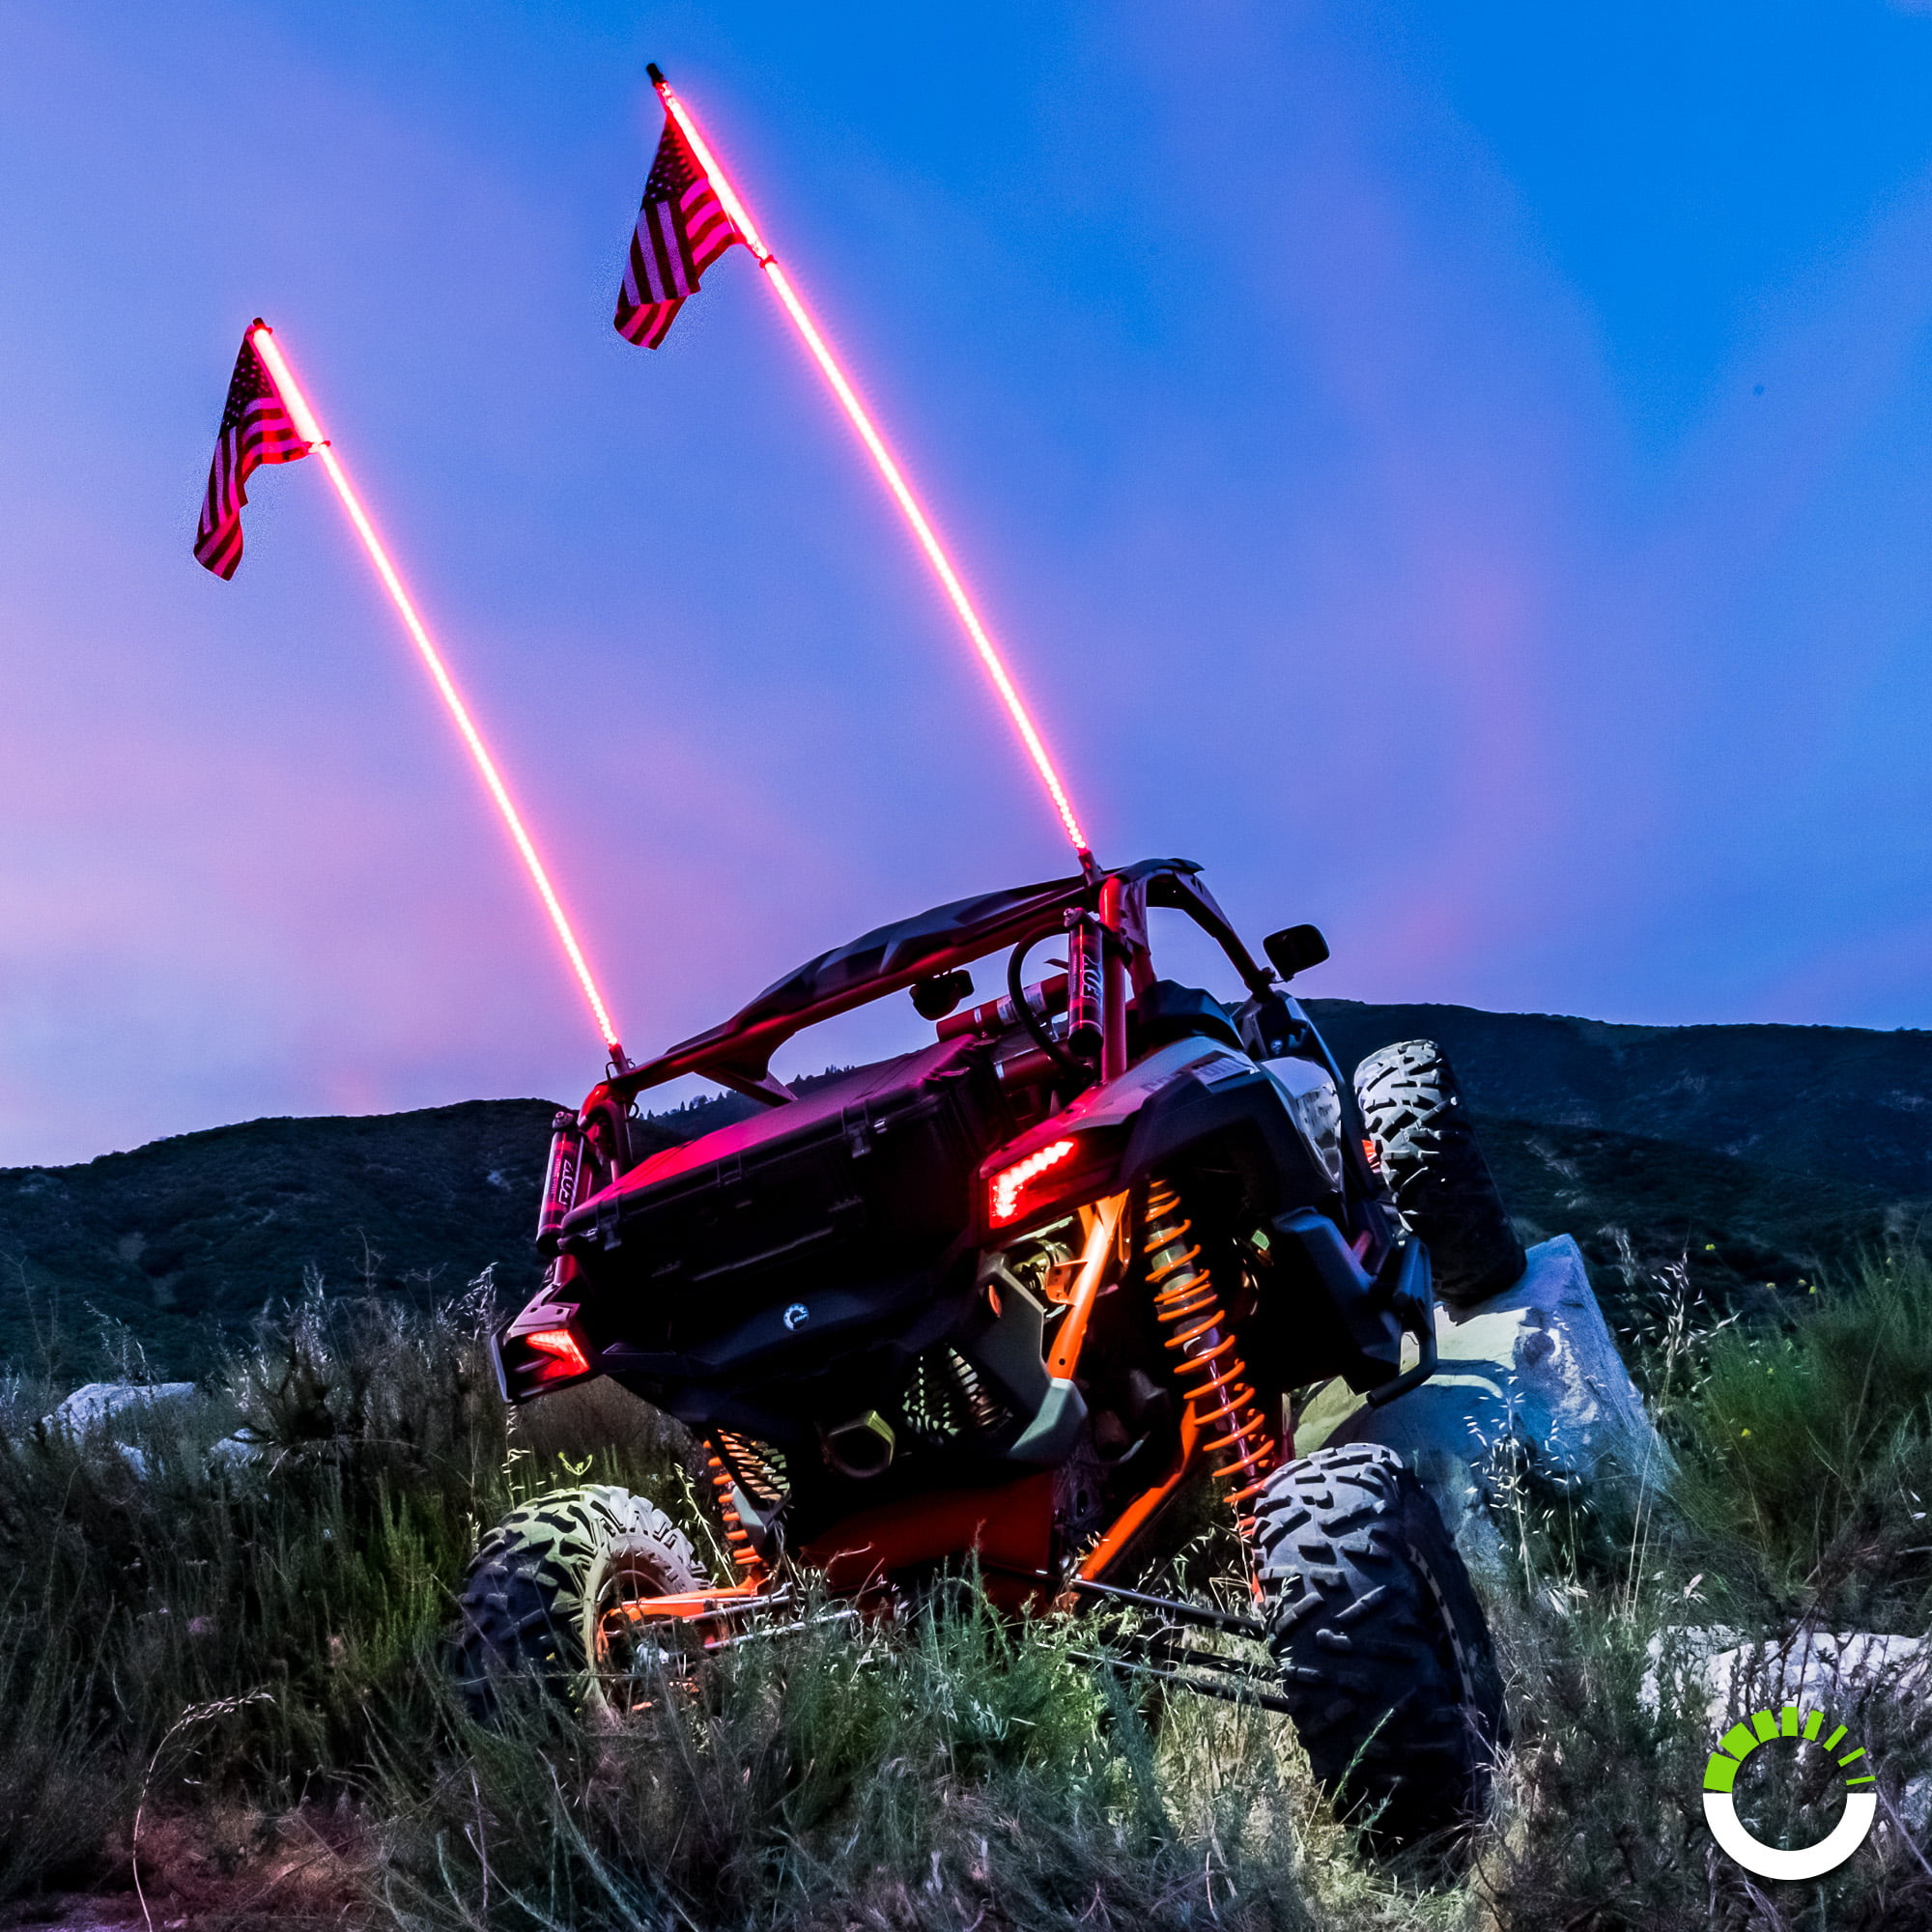 4ft LED Light Whip AAIWA LED Whip Lights for ATV UTV LED Whip Light Blue Light Antenna Whips for RZR Polaris Off-road Sand Dune Buggy 4x4 Jeep 